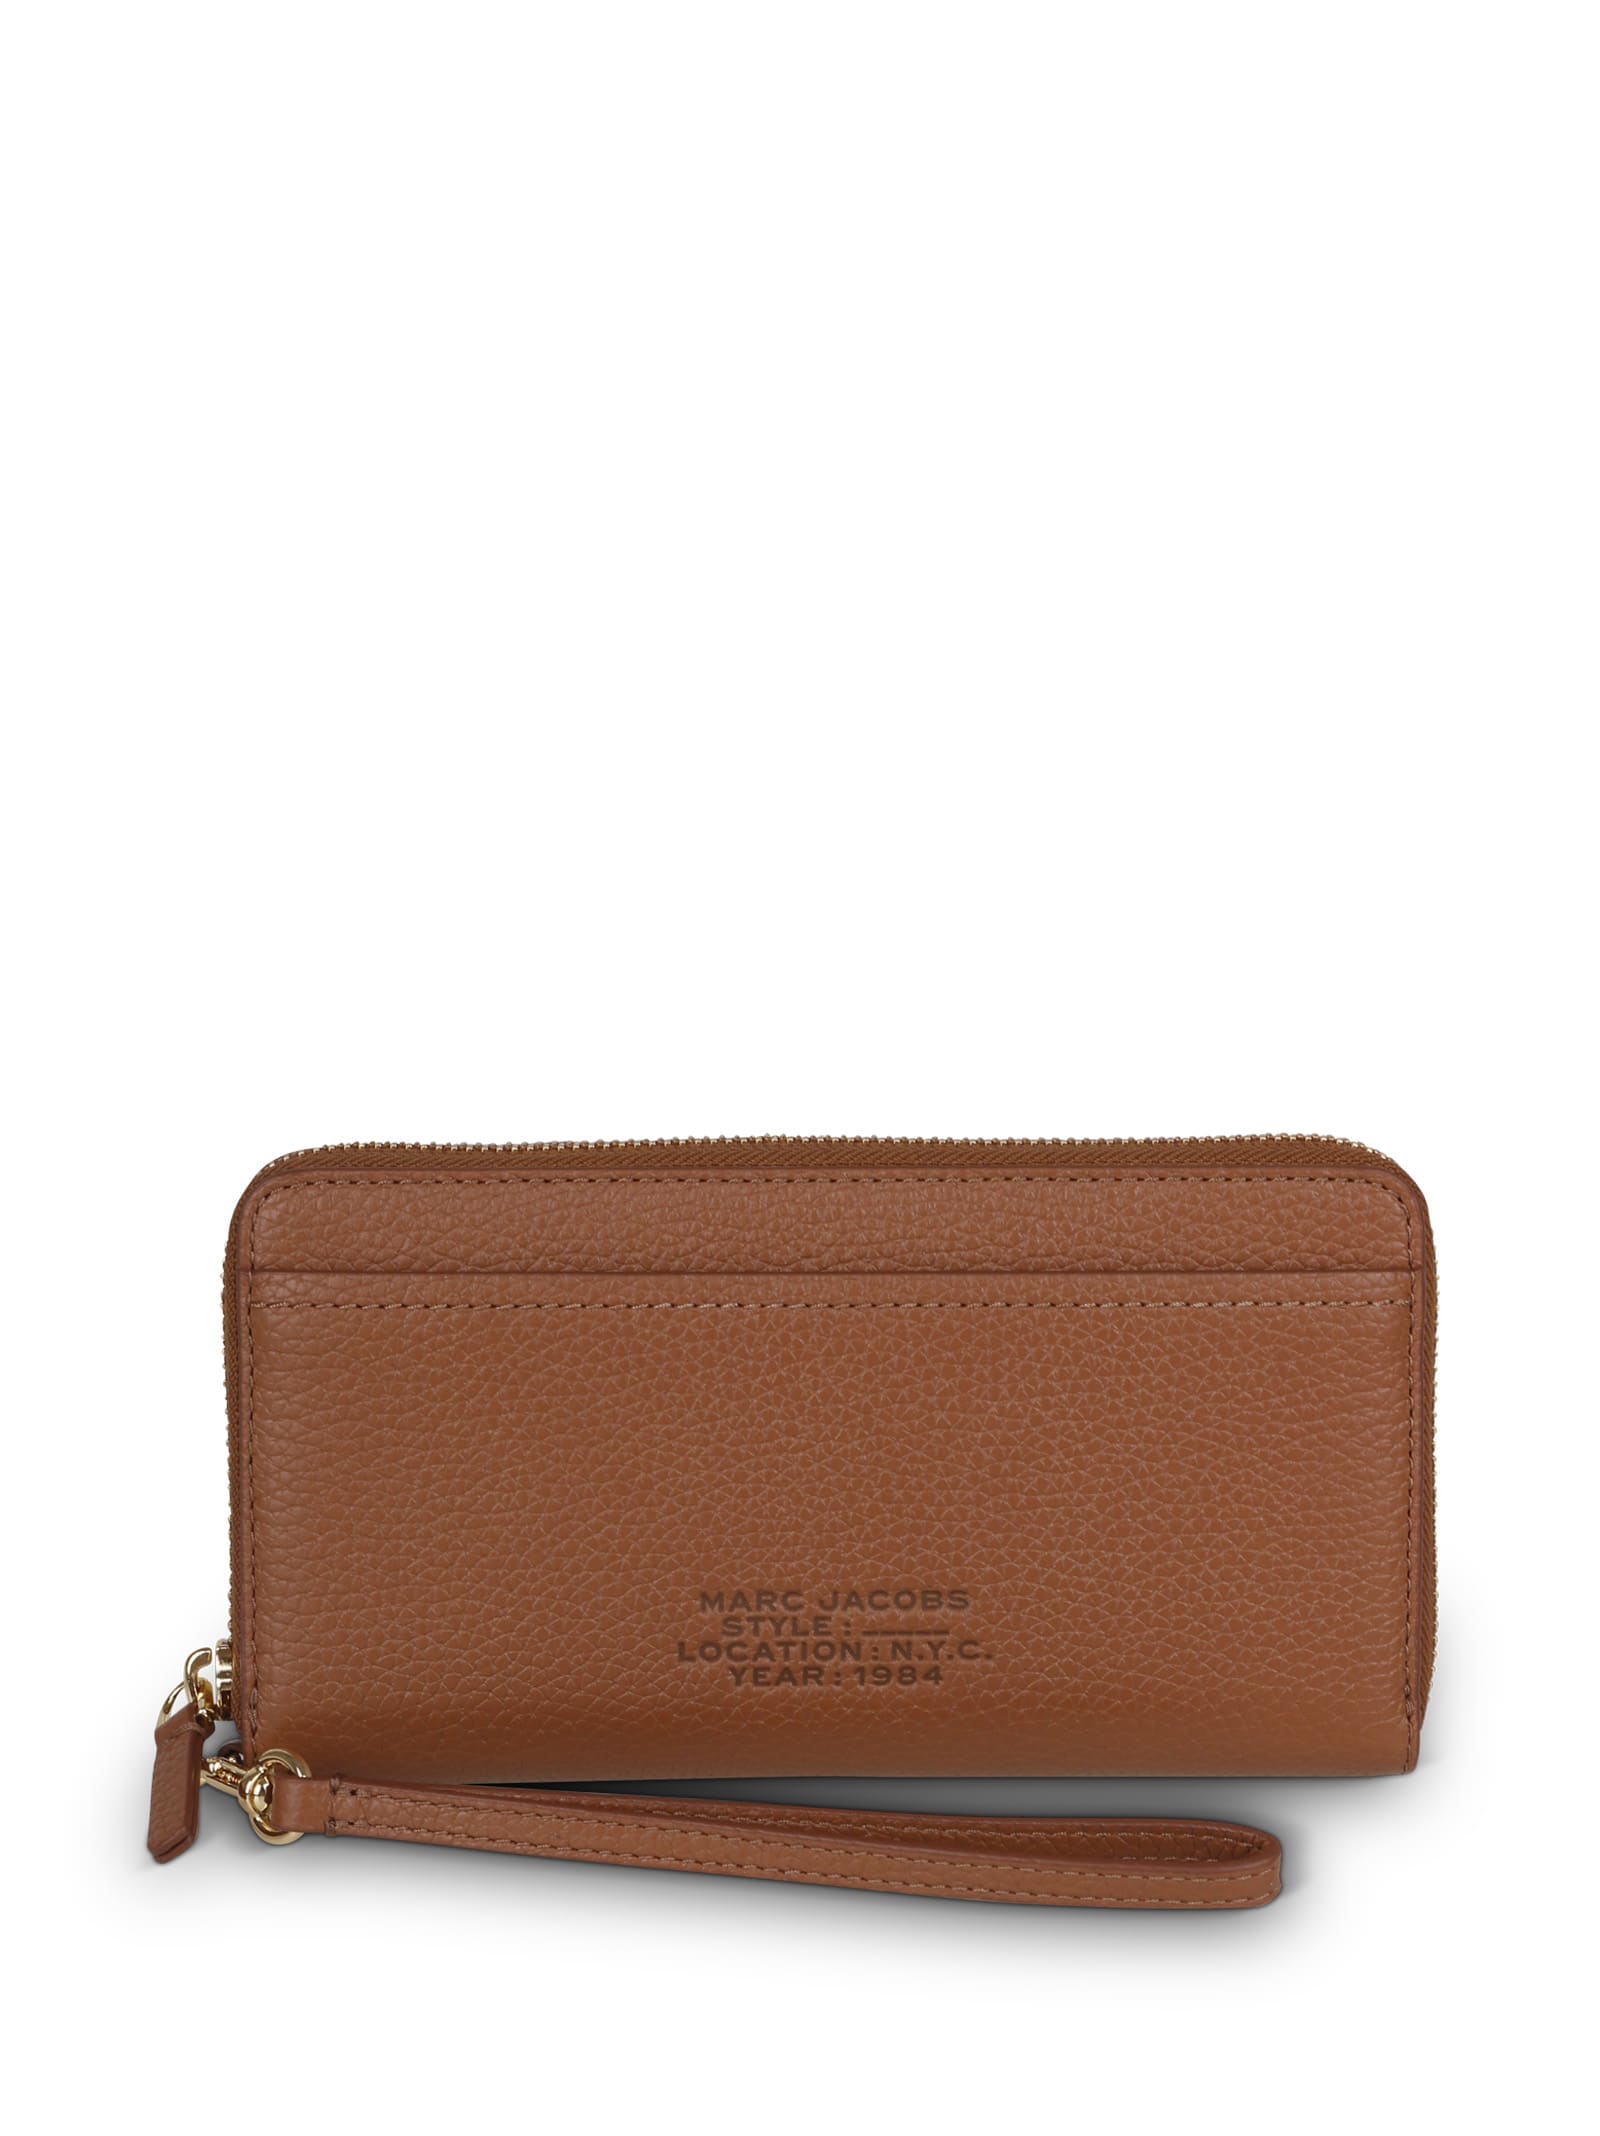 MARC JACOBS MARC JACOBS THE CONTINENTAL LEATHER WALLET